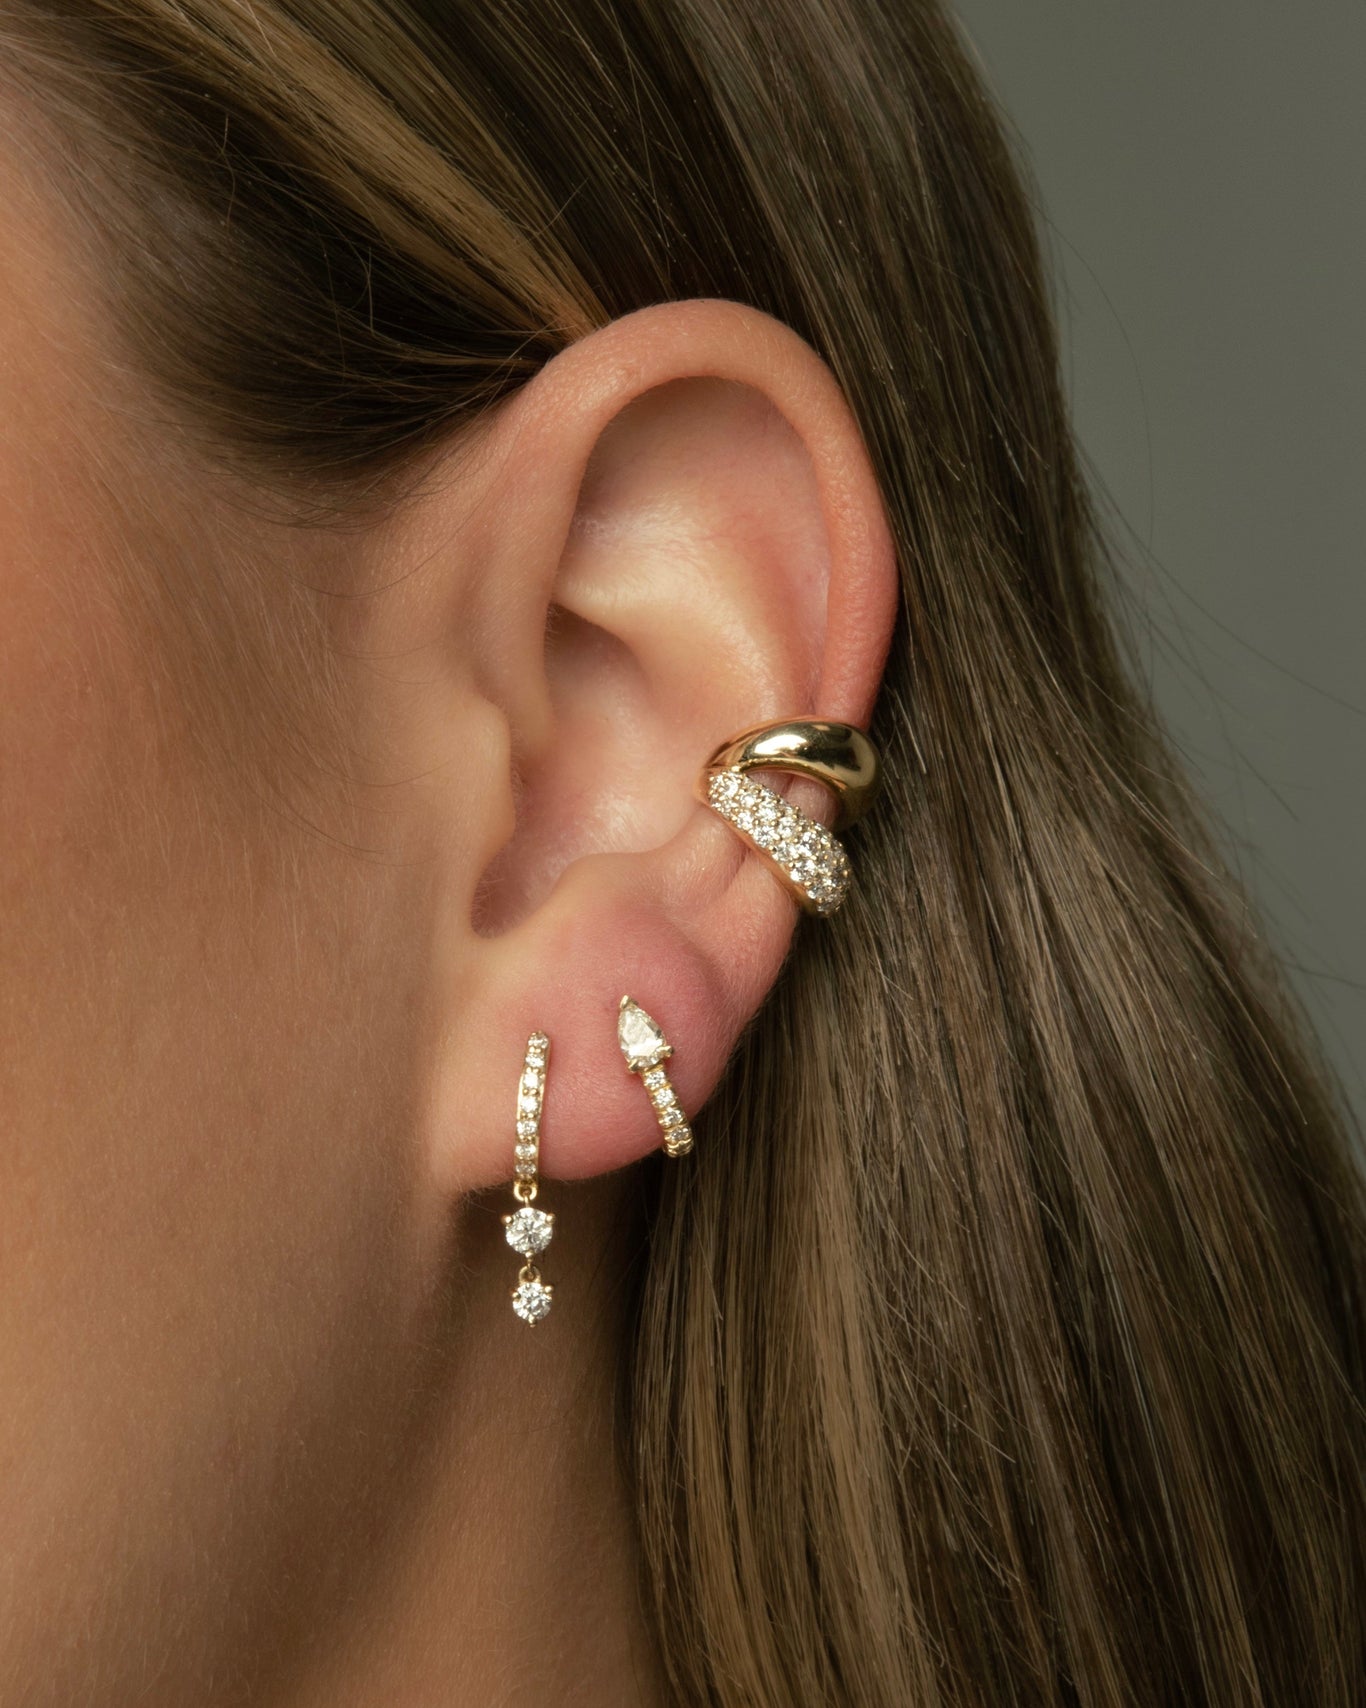 Gemini Ear Cuff shown with the Stardust Huggie and Serpent Huggie